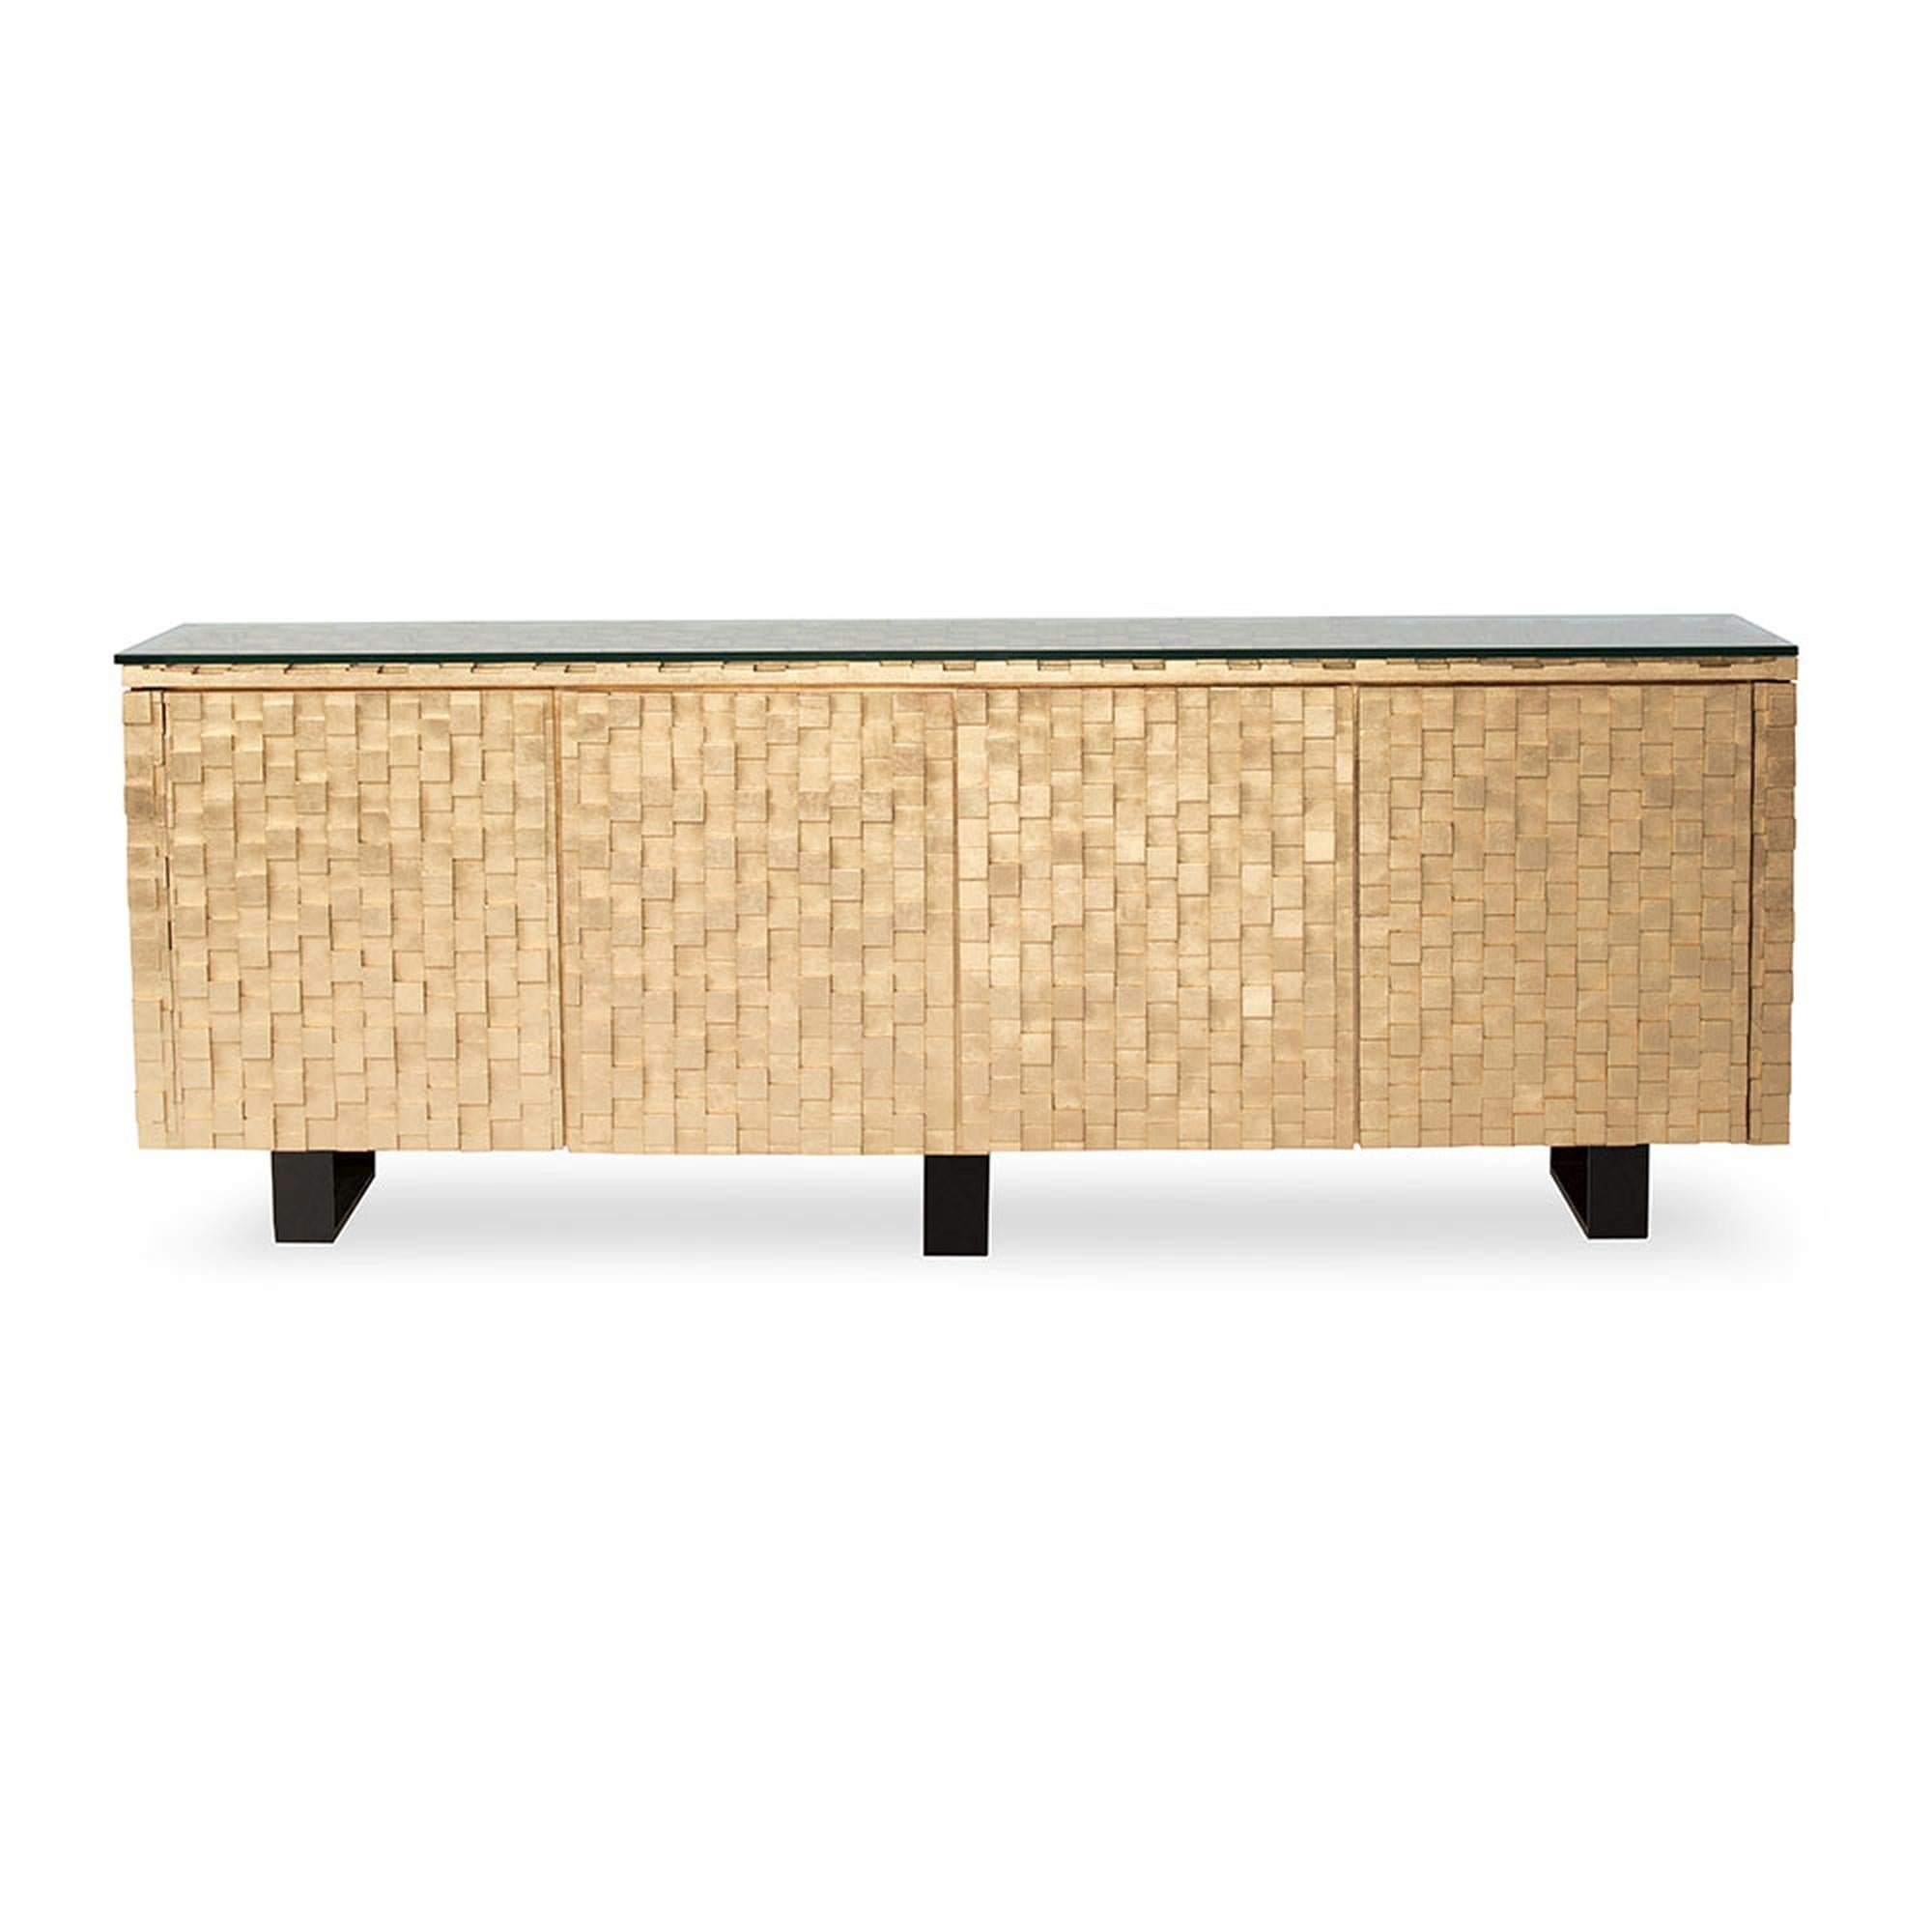 Effortlessly assuming center stage, the Astaire credenza is a magnificent work of art. The extravagance of the collection’s credenza features richly dimensional hand-gilded constructions that are hand gilded and individually placed at three